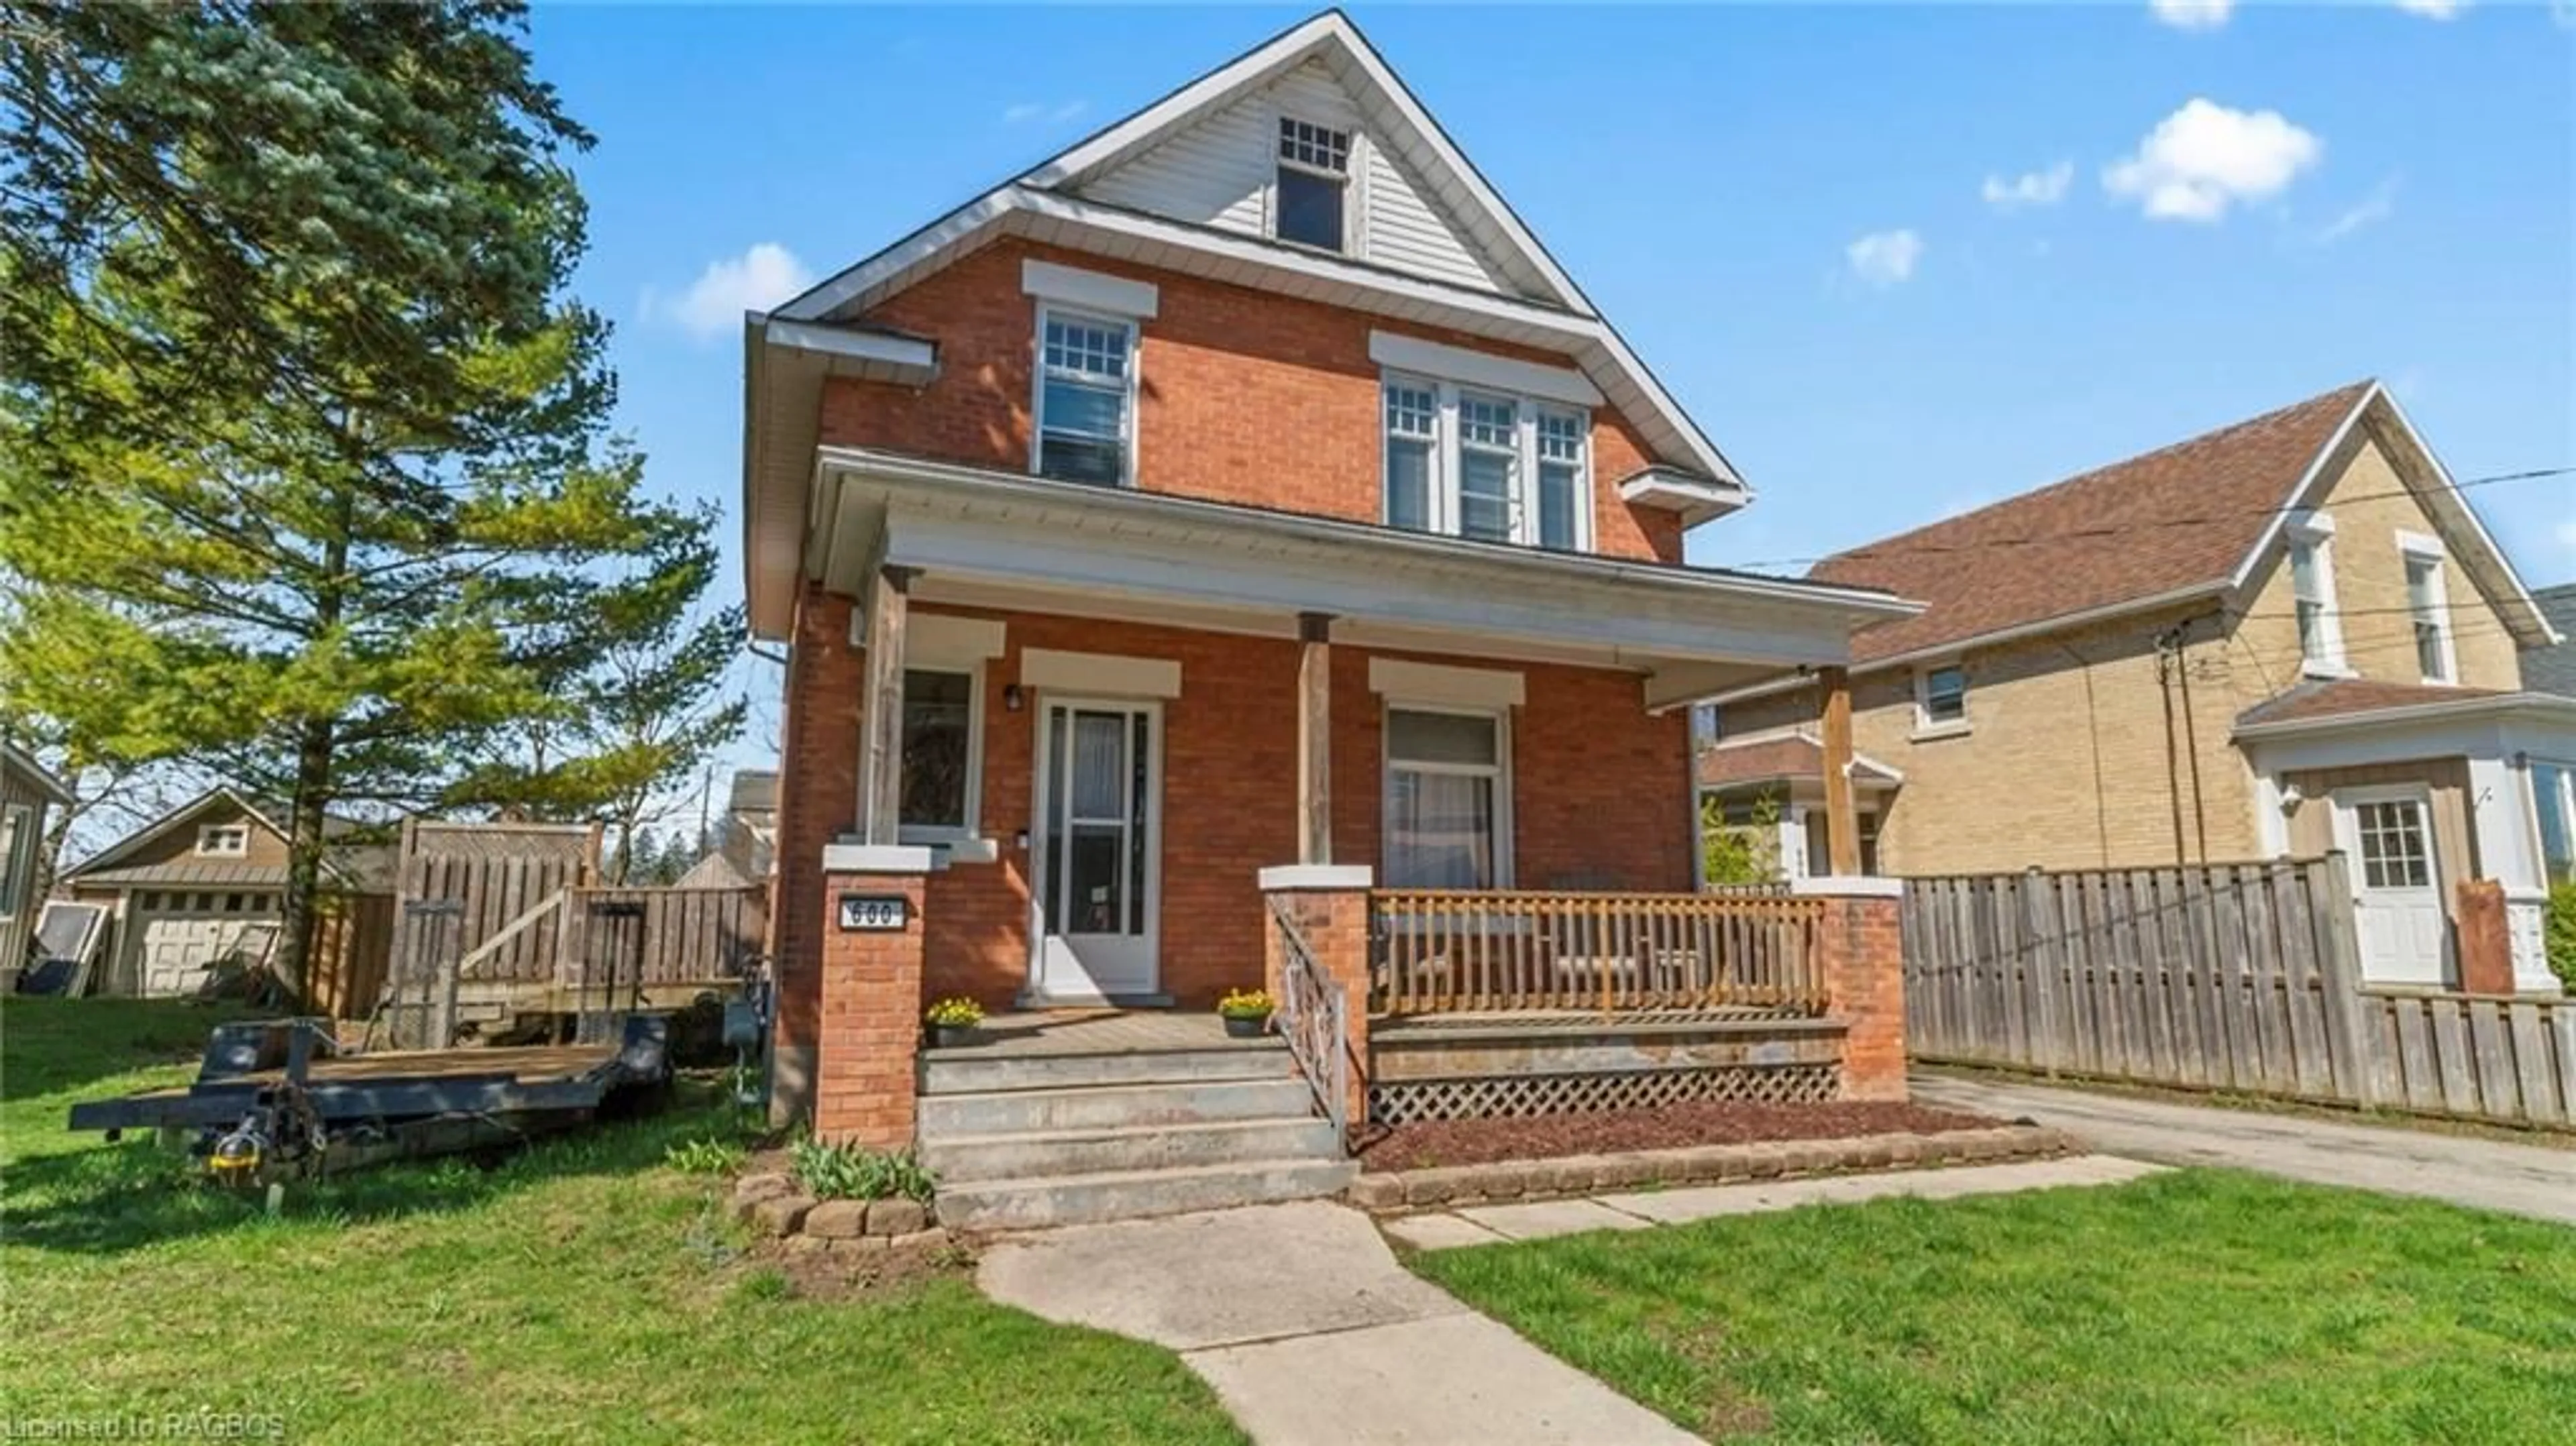 Home with brick exterior material for 600 8th Ave, Hanover Ontario N4N 2L3